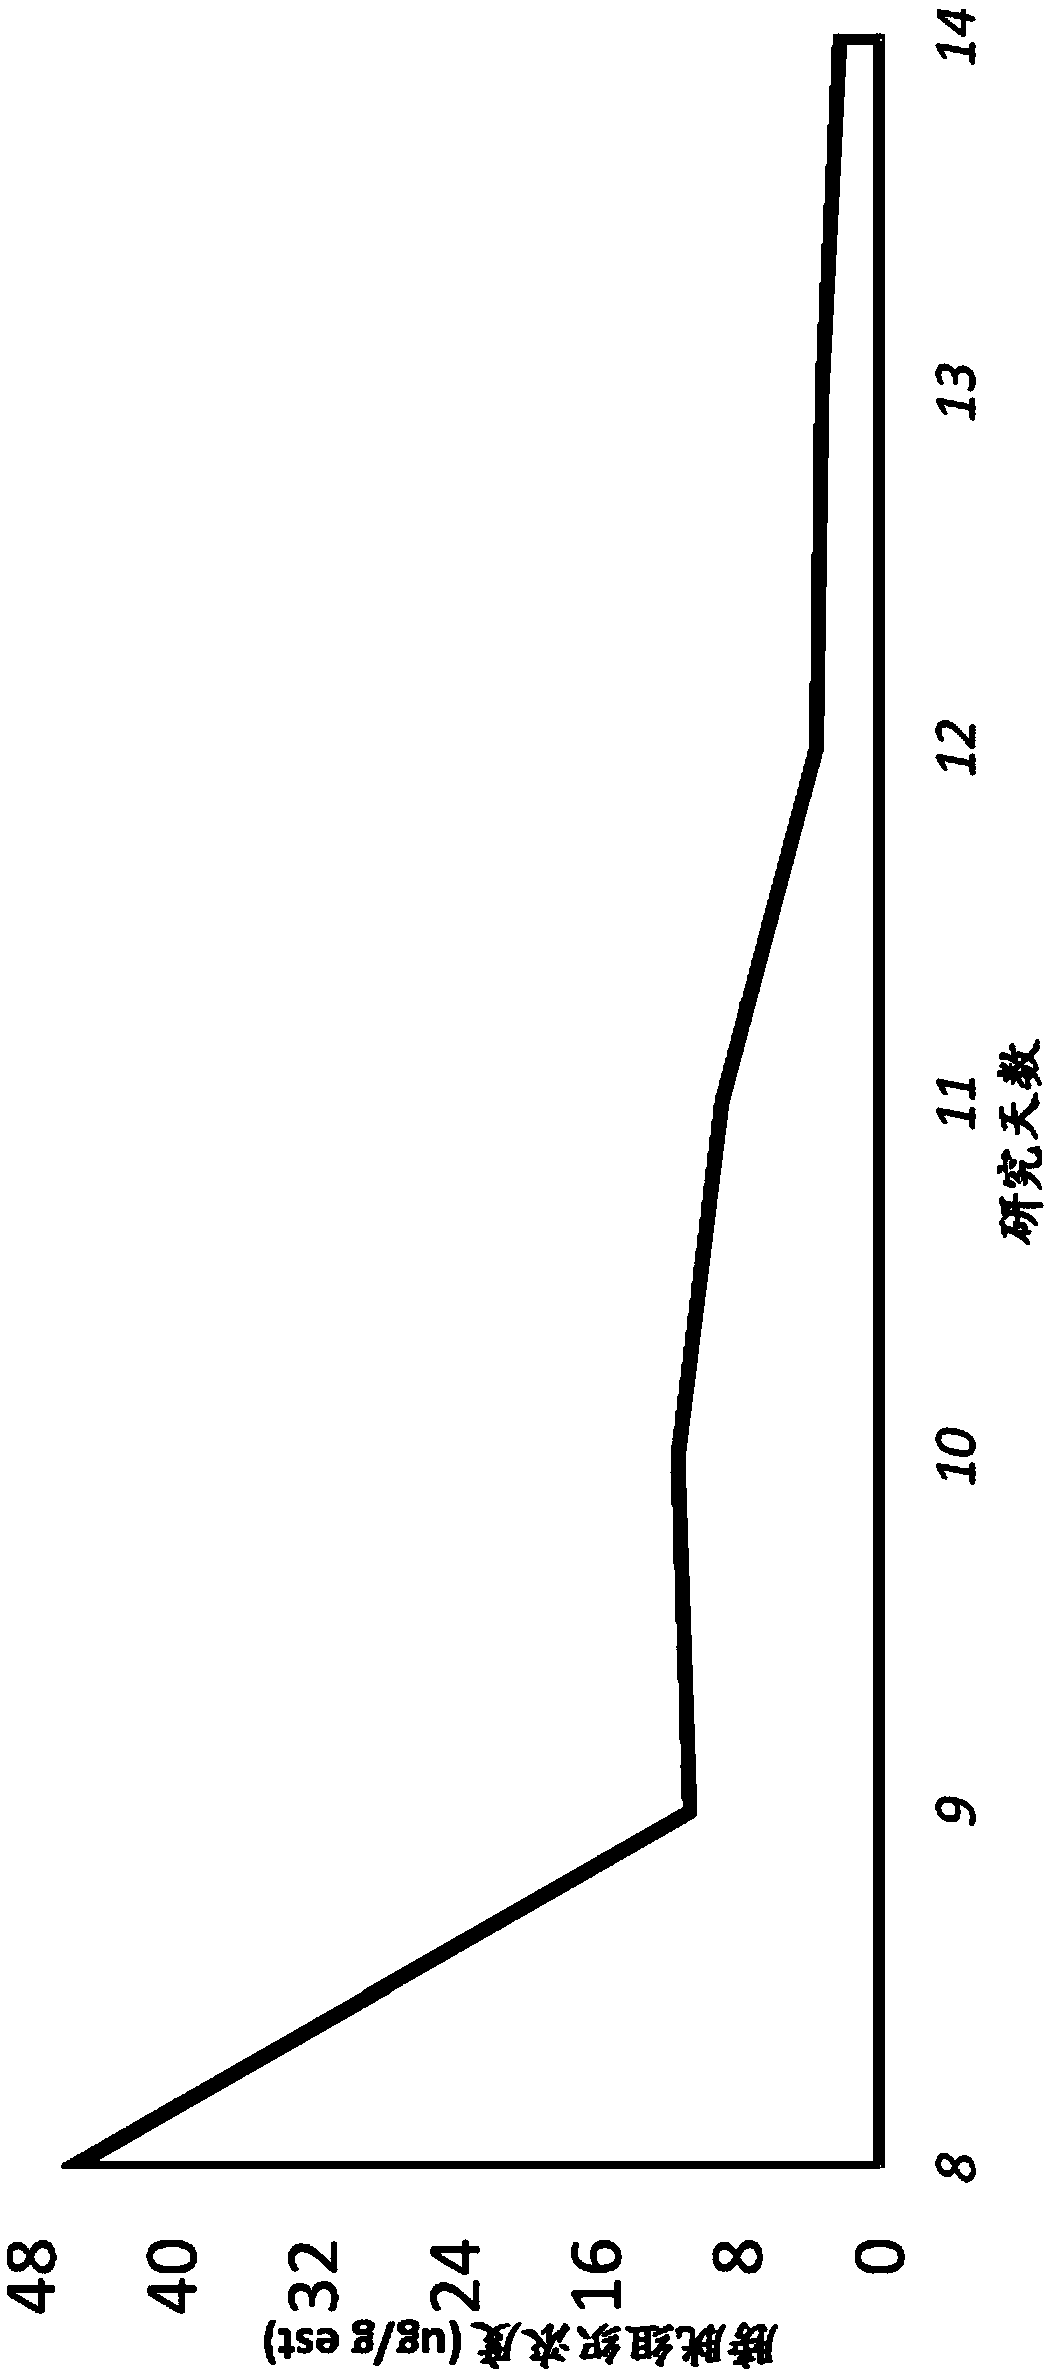 Method of treating lower tract urothelial cancer